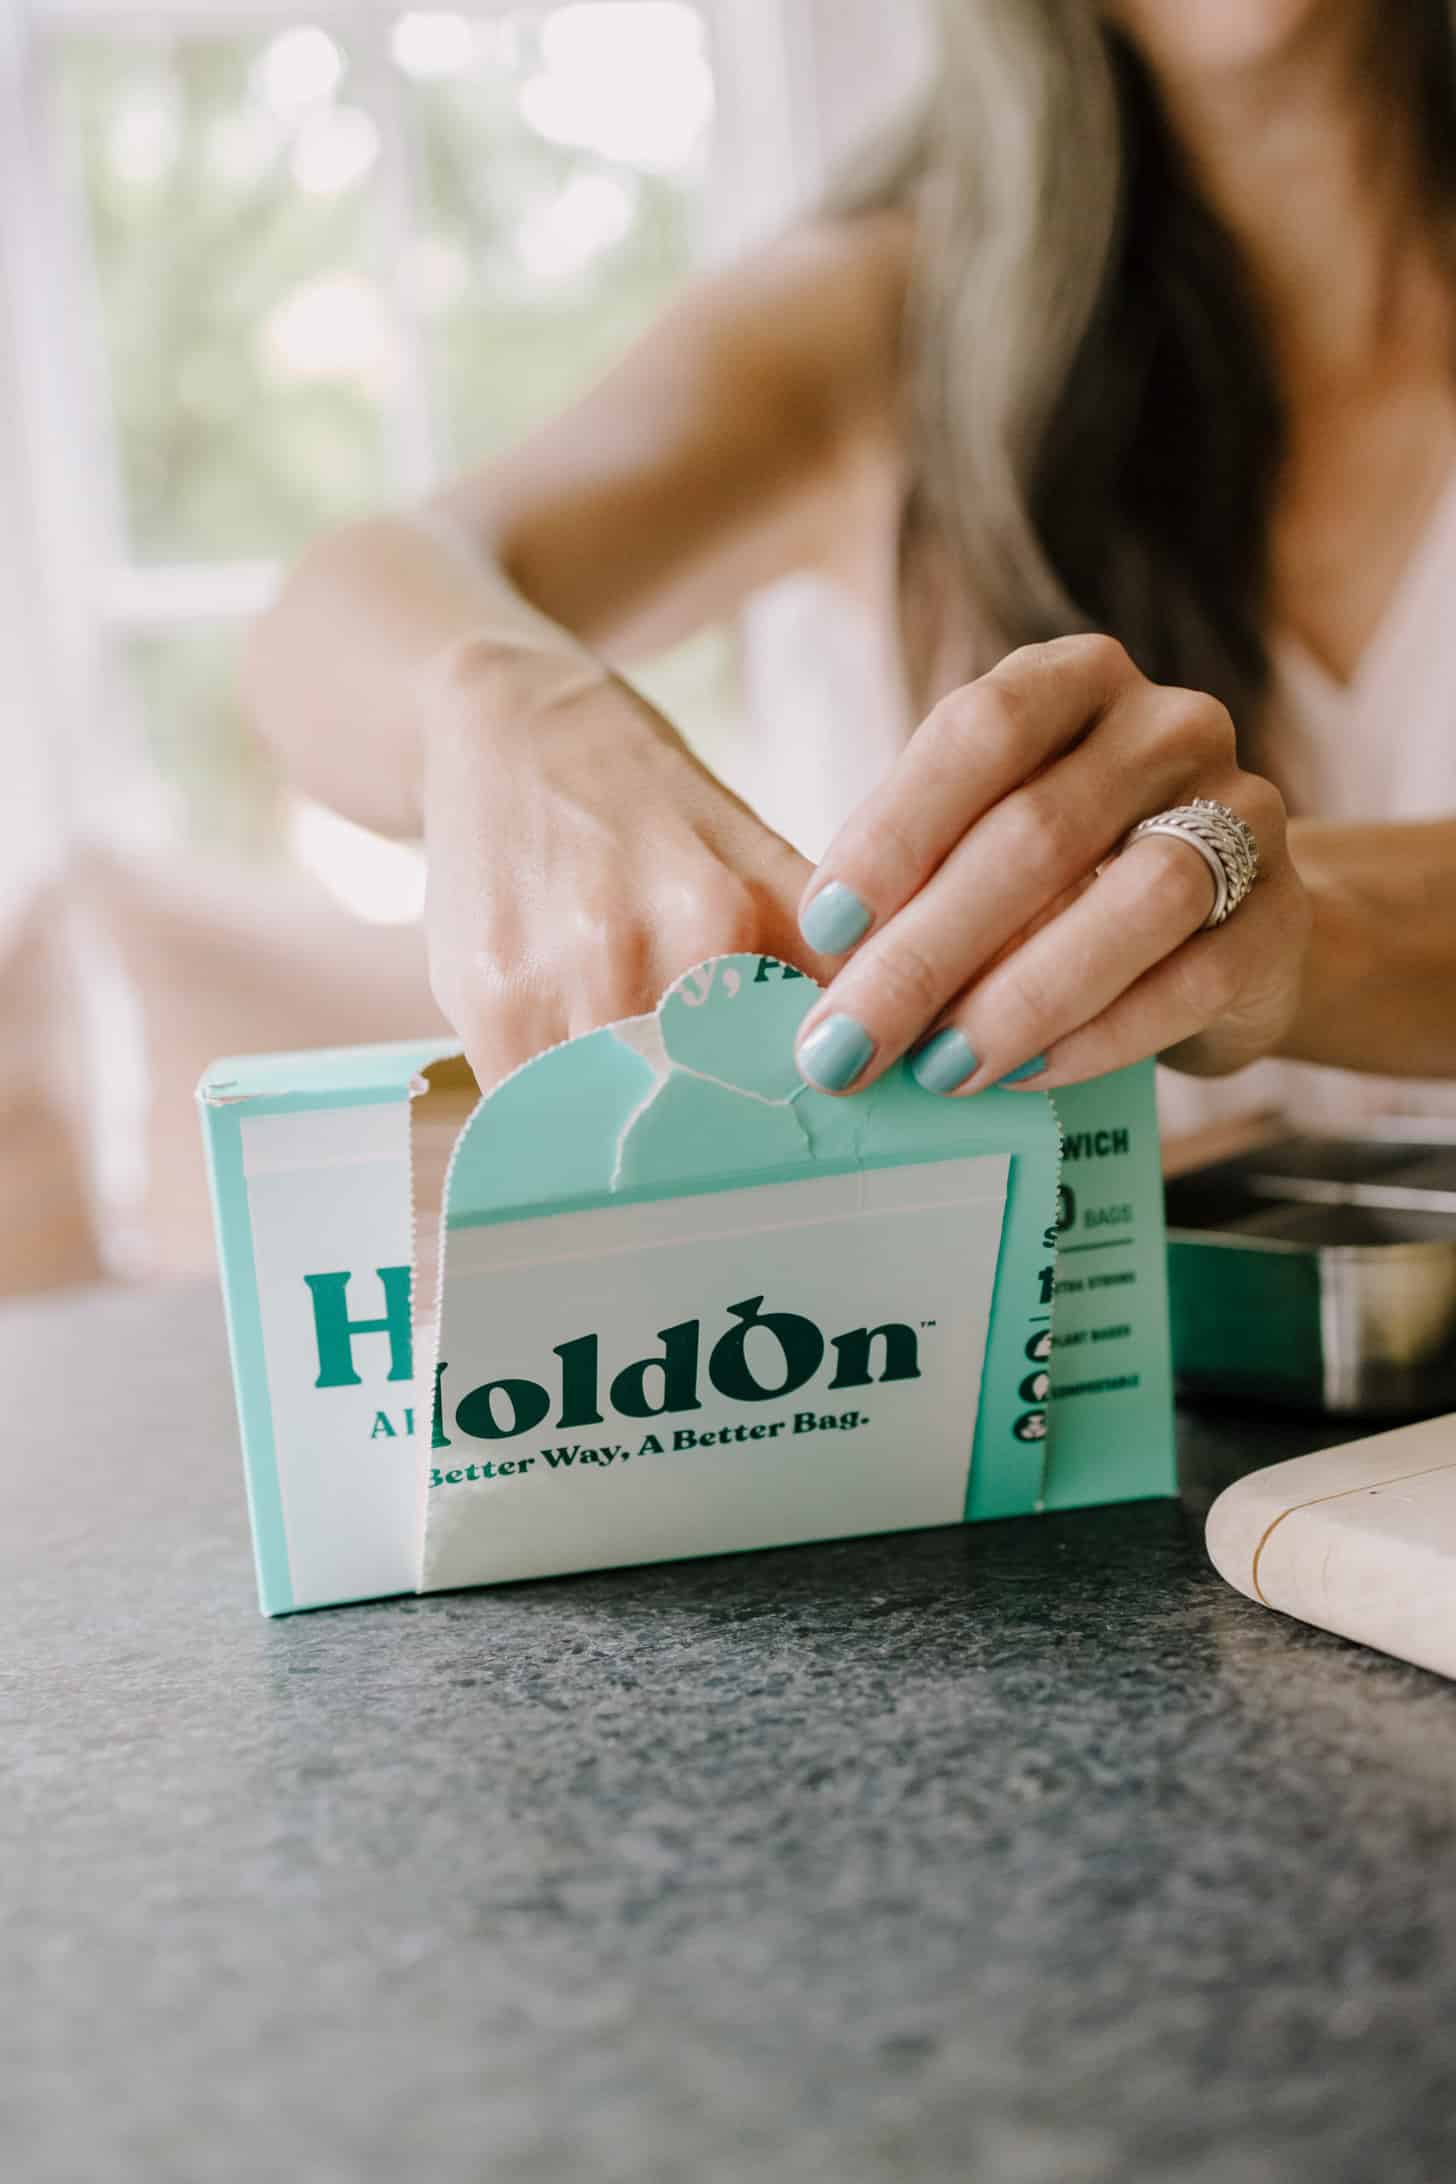 a woman with painted fingernails opens a box of HoldOn compostable bags